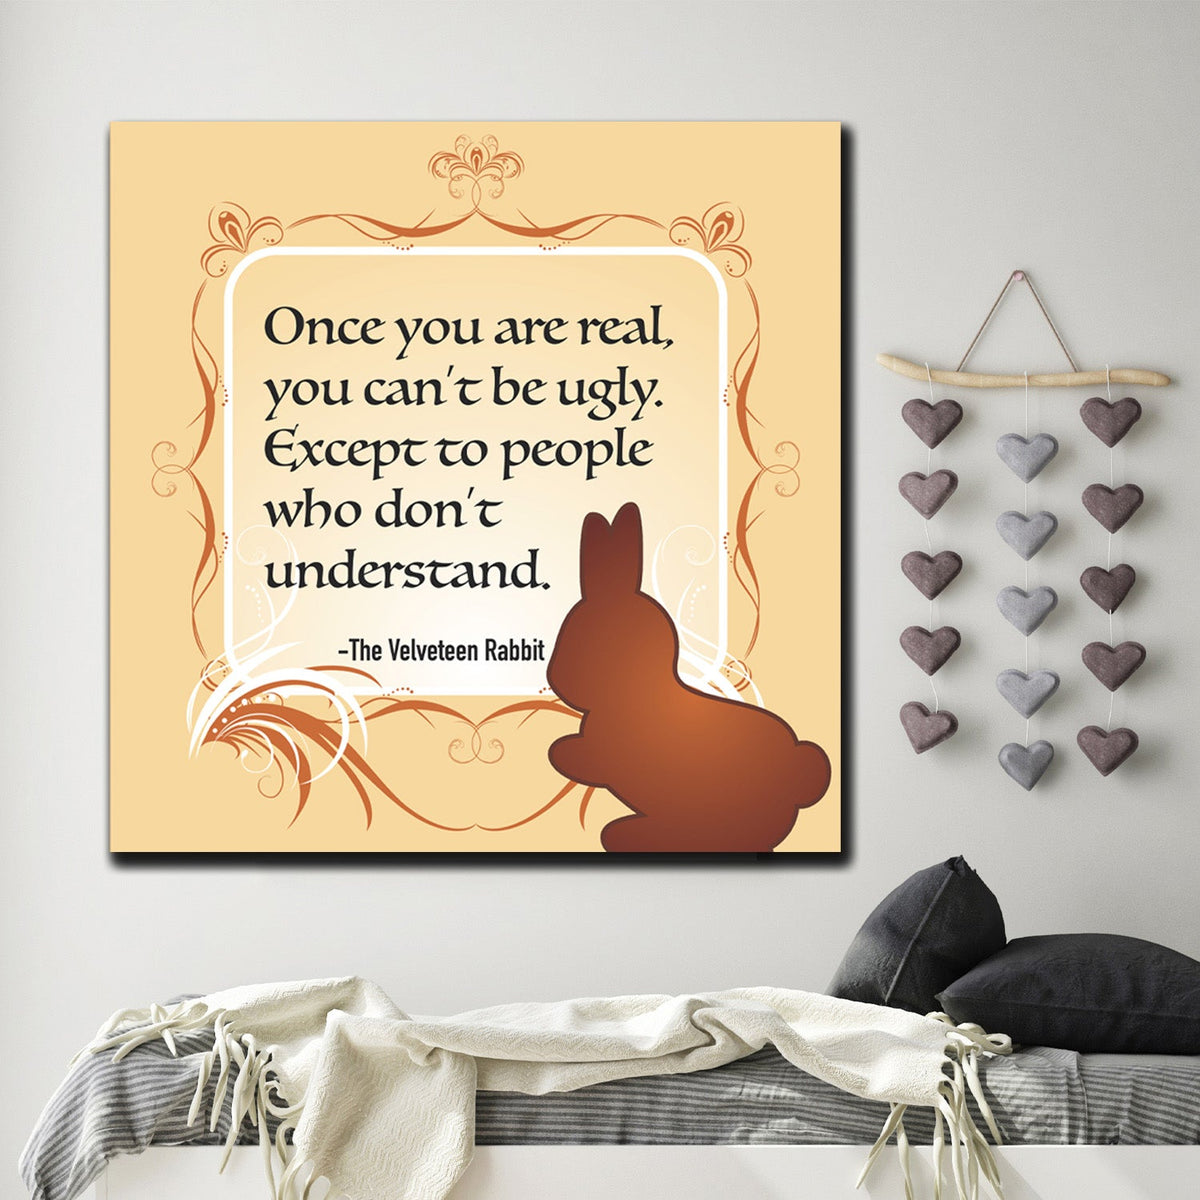 https://cdn.shopify.com/s/files/1/0387/9986/8044/products/TheVelveteenRabbitQuoteCanvasArtprintStretched-3.jpg